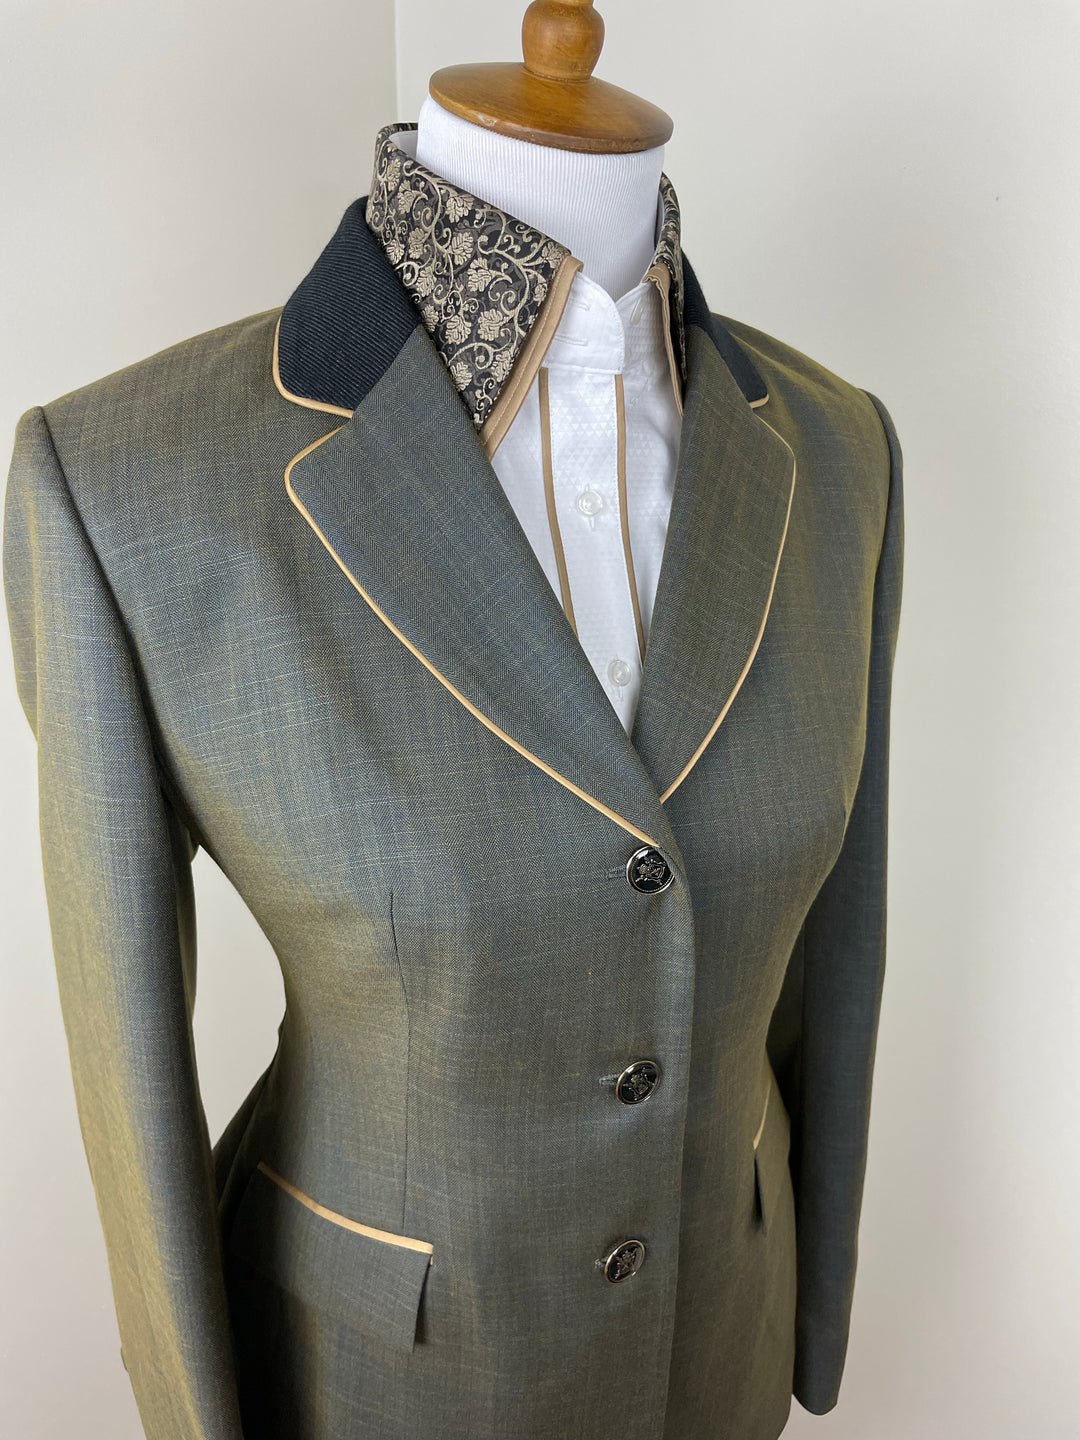 Formal ladies suit - For Sale in Zimbabwe